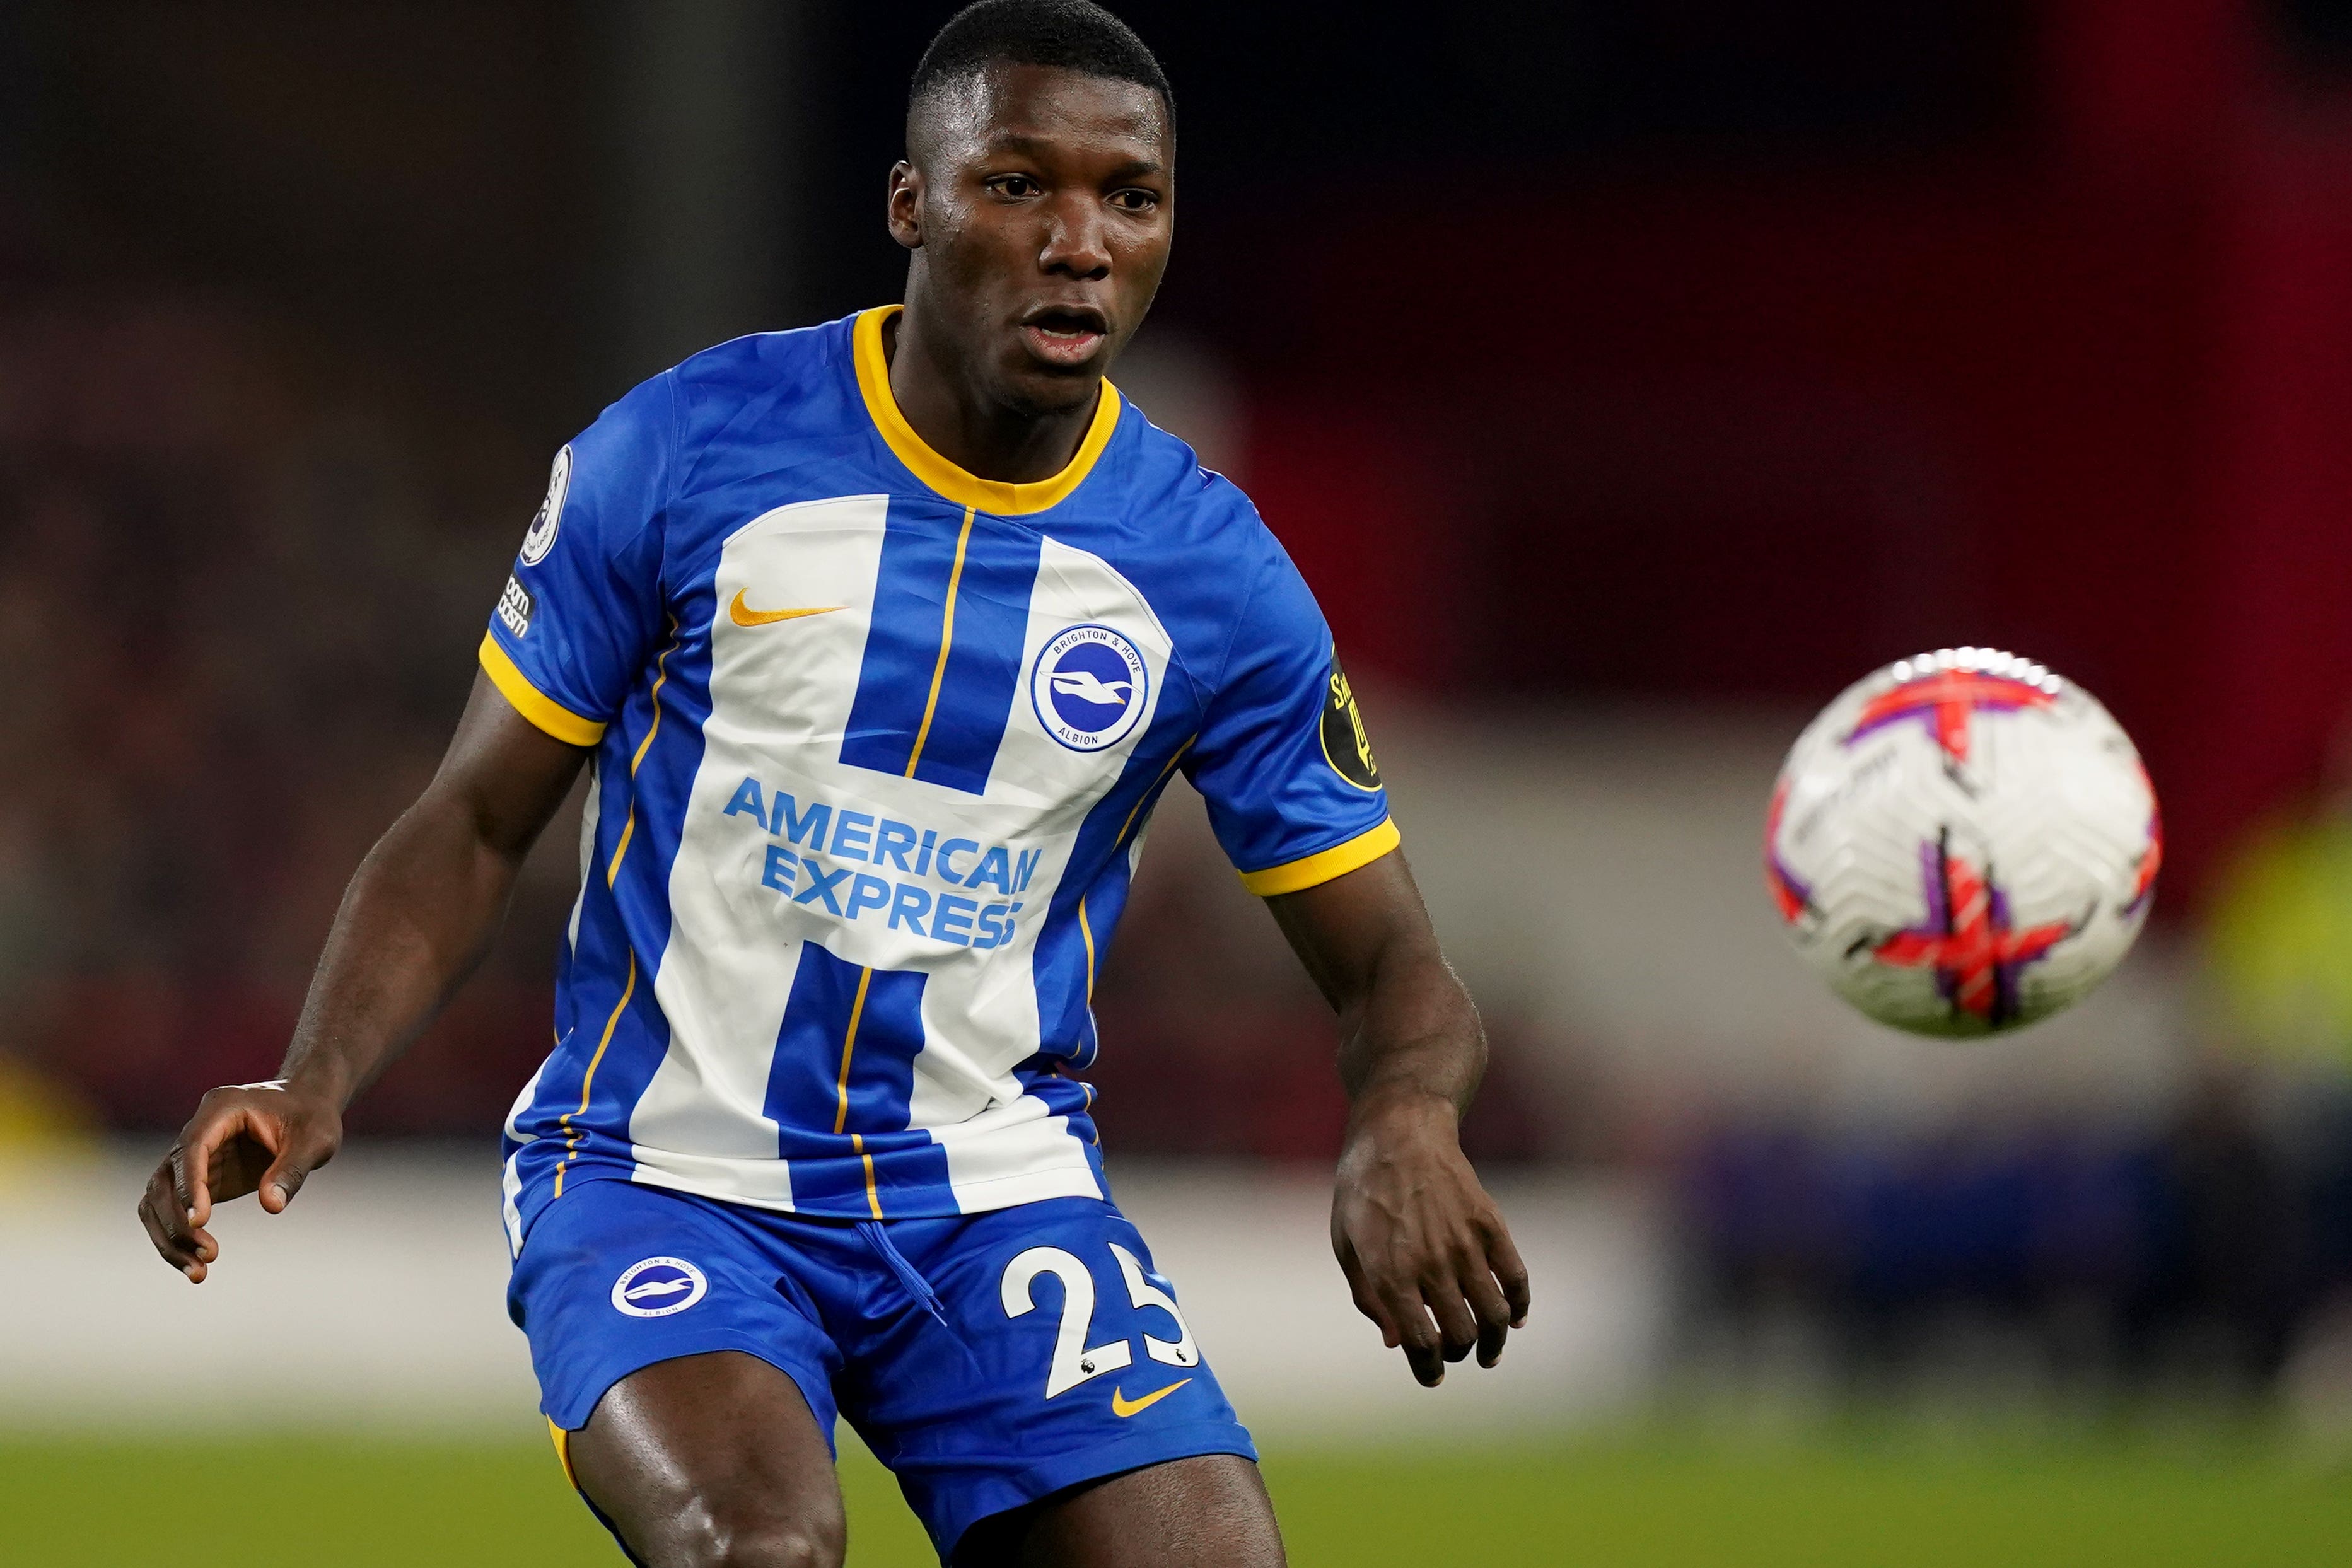 Brighton star Moises Caicedo performed out of position against Manchester United (Mike Egerton/PA)